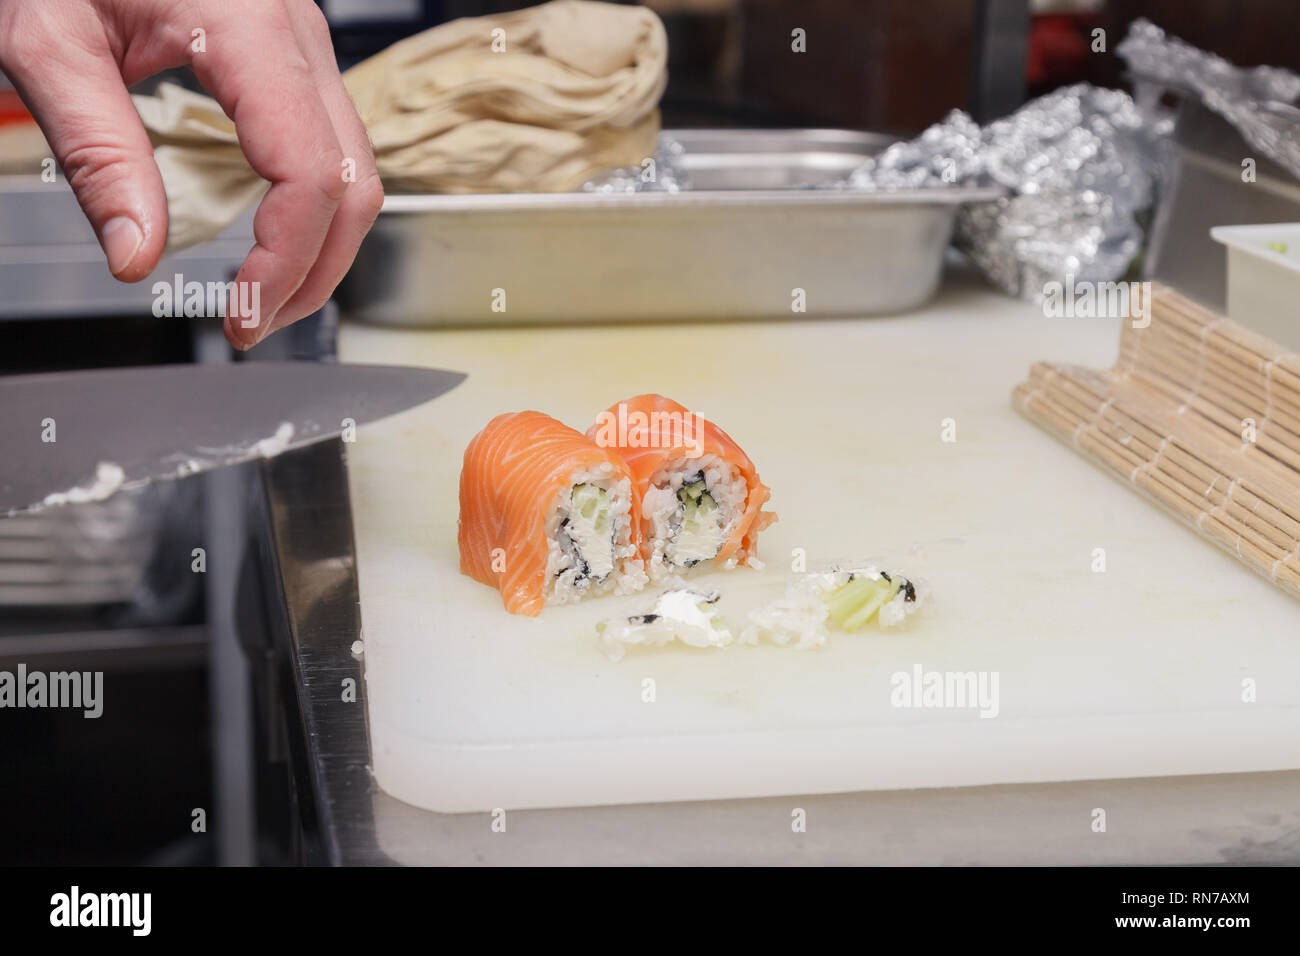 https://c8.alamy.com/comp/RN7AXM/closeup-of-the-hand-the-cook-cuts-a-philadelphia-roll-in-a-restaurant-kitchen-with-a-sharp-knife-of-sushi-concept-cooking-japanese-dishes-RN7AXM.jpg